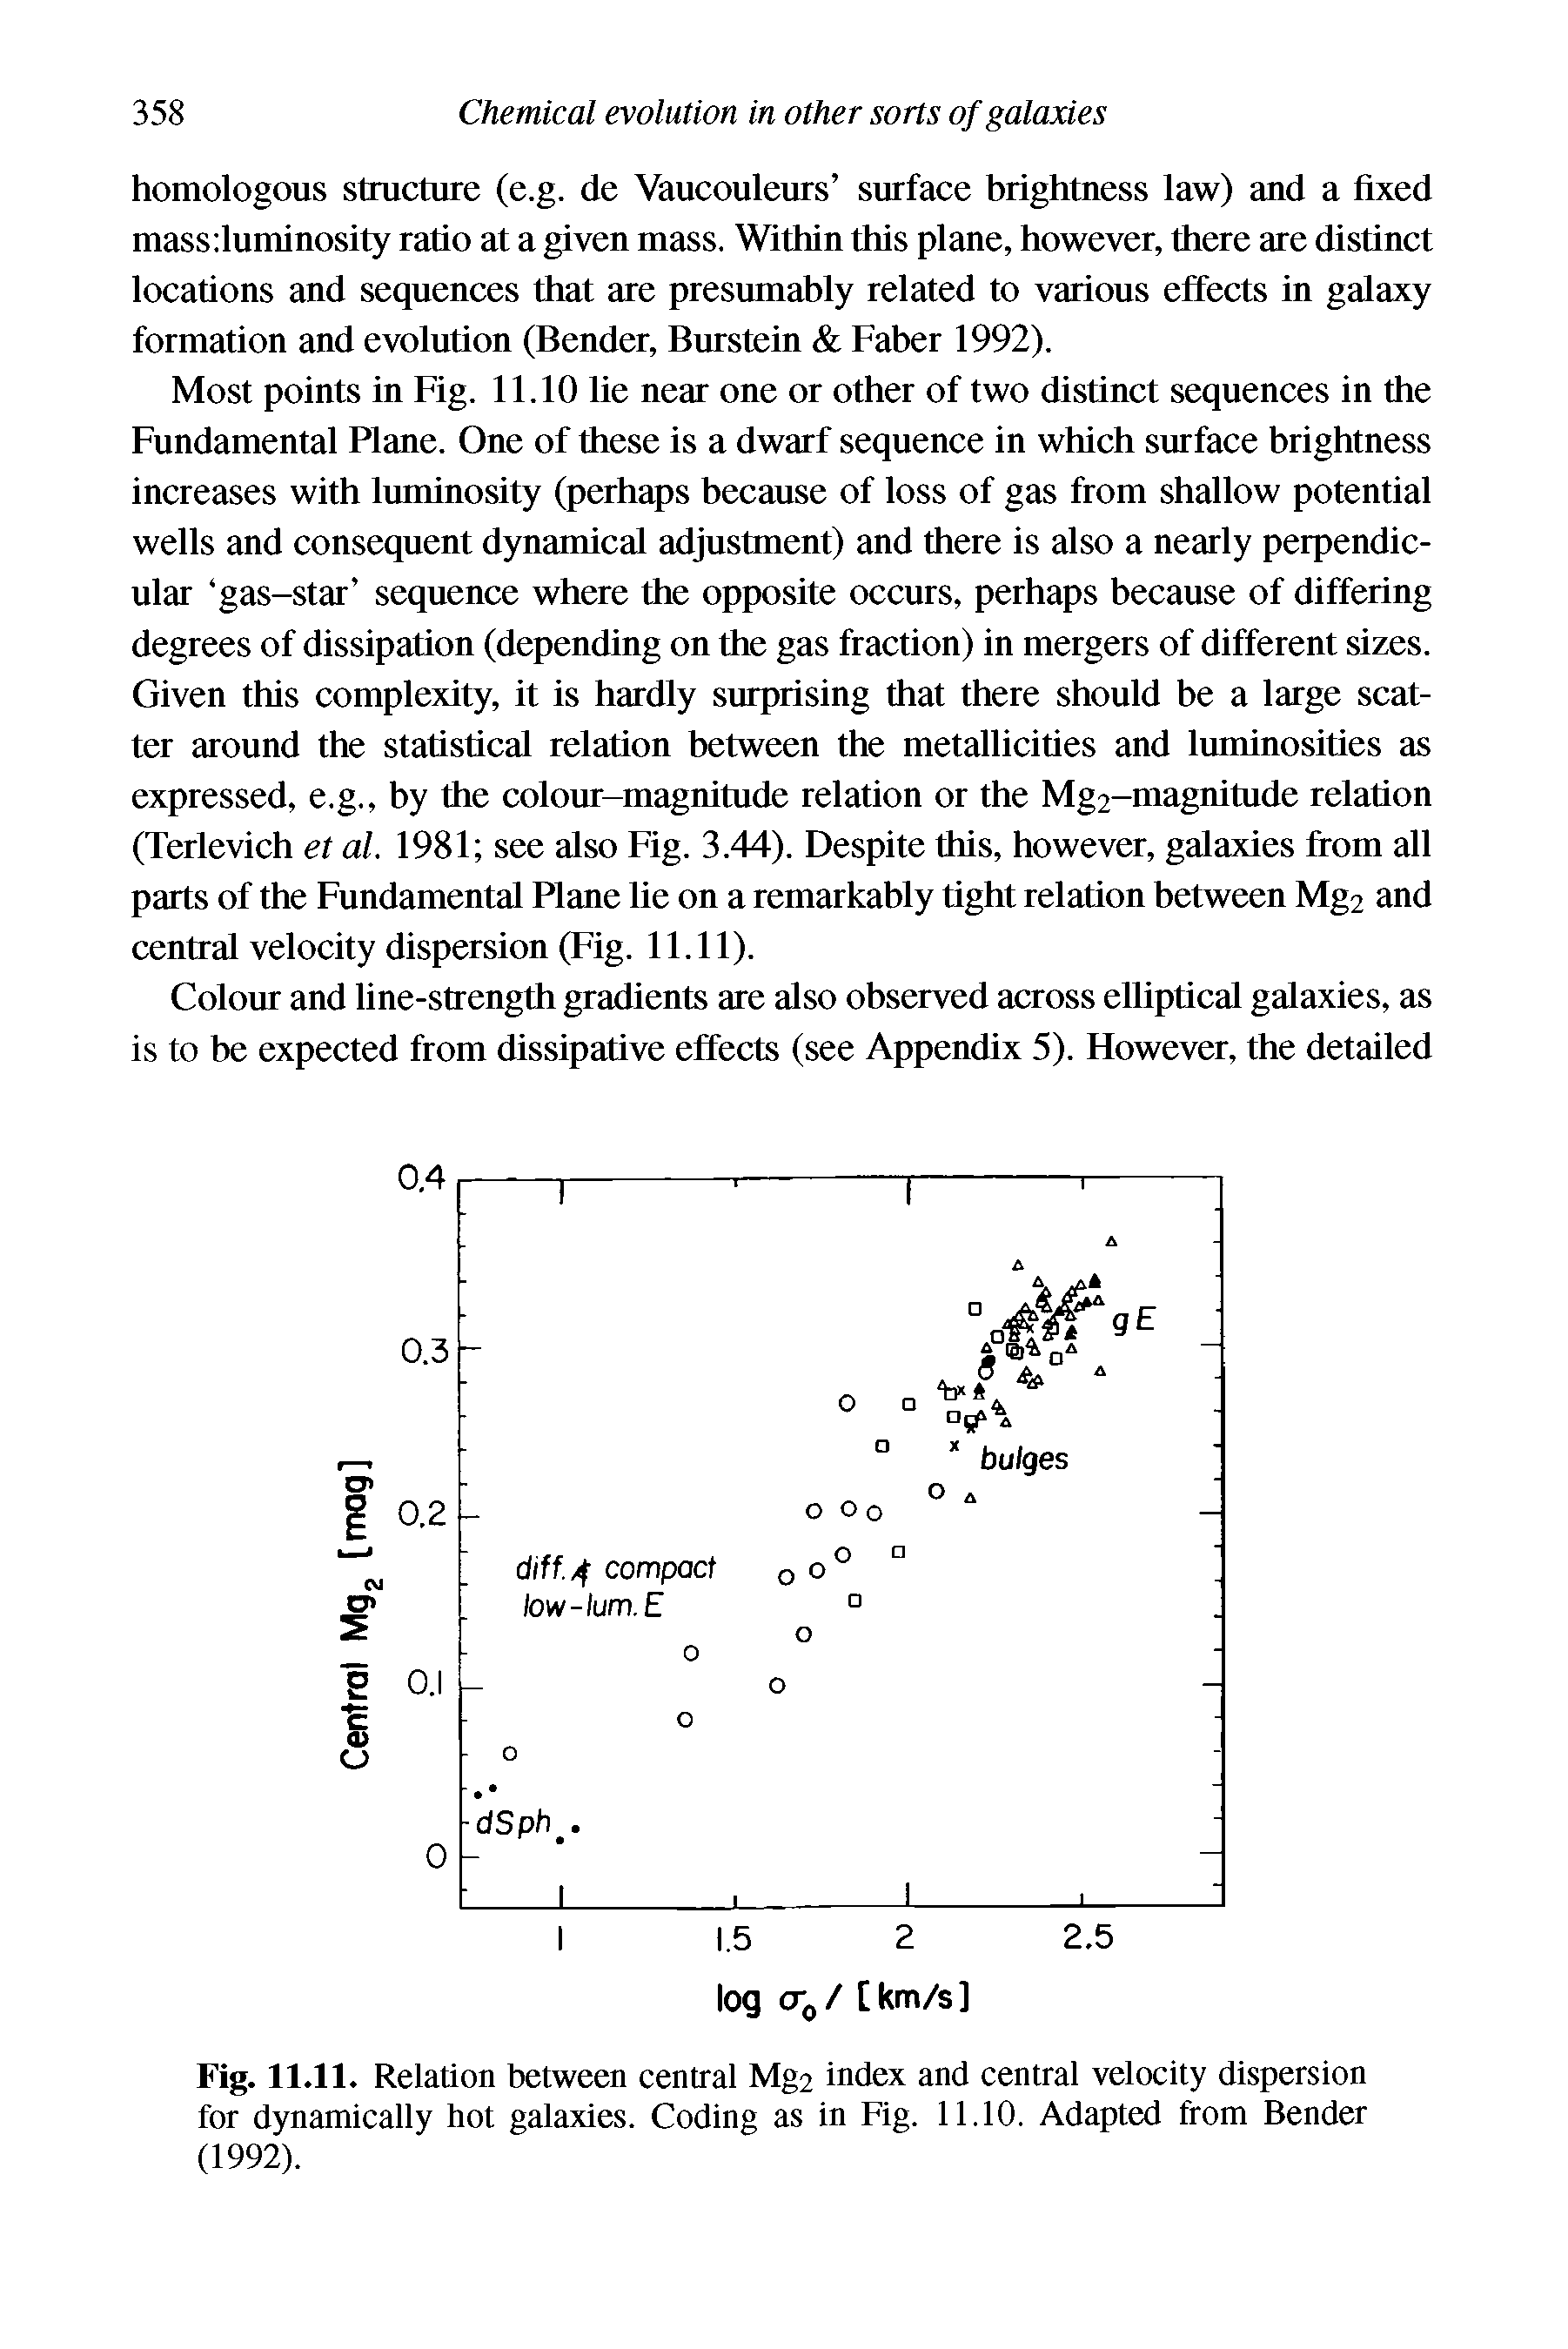 Fig. 11.11. Relation between central Mg2 index and central velocity dispersion for dynamically hot galaxies. Coding as in Fig. 11.10. Adapted from Bender (1992).